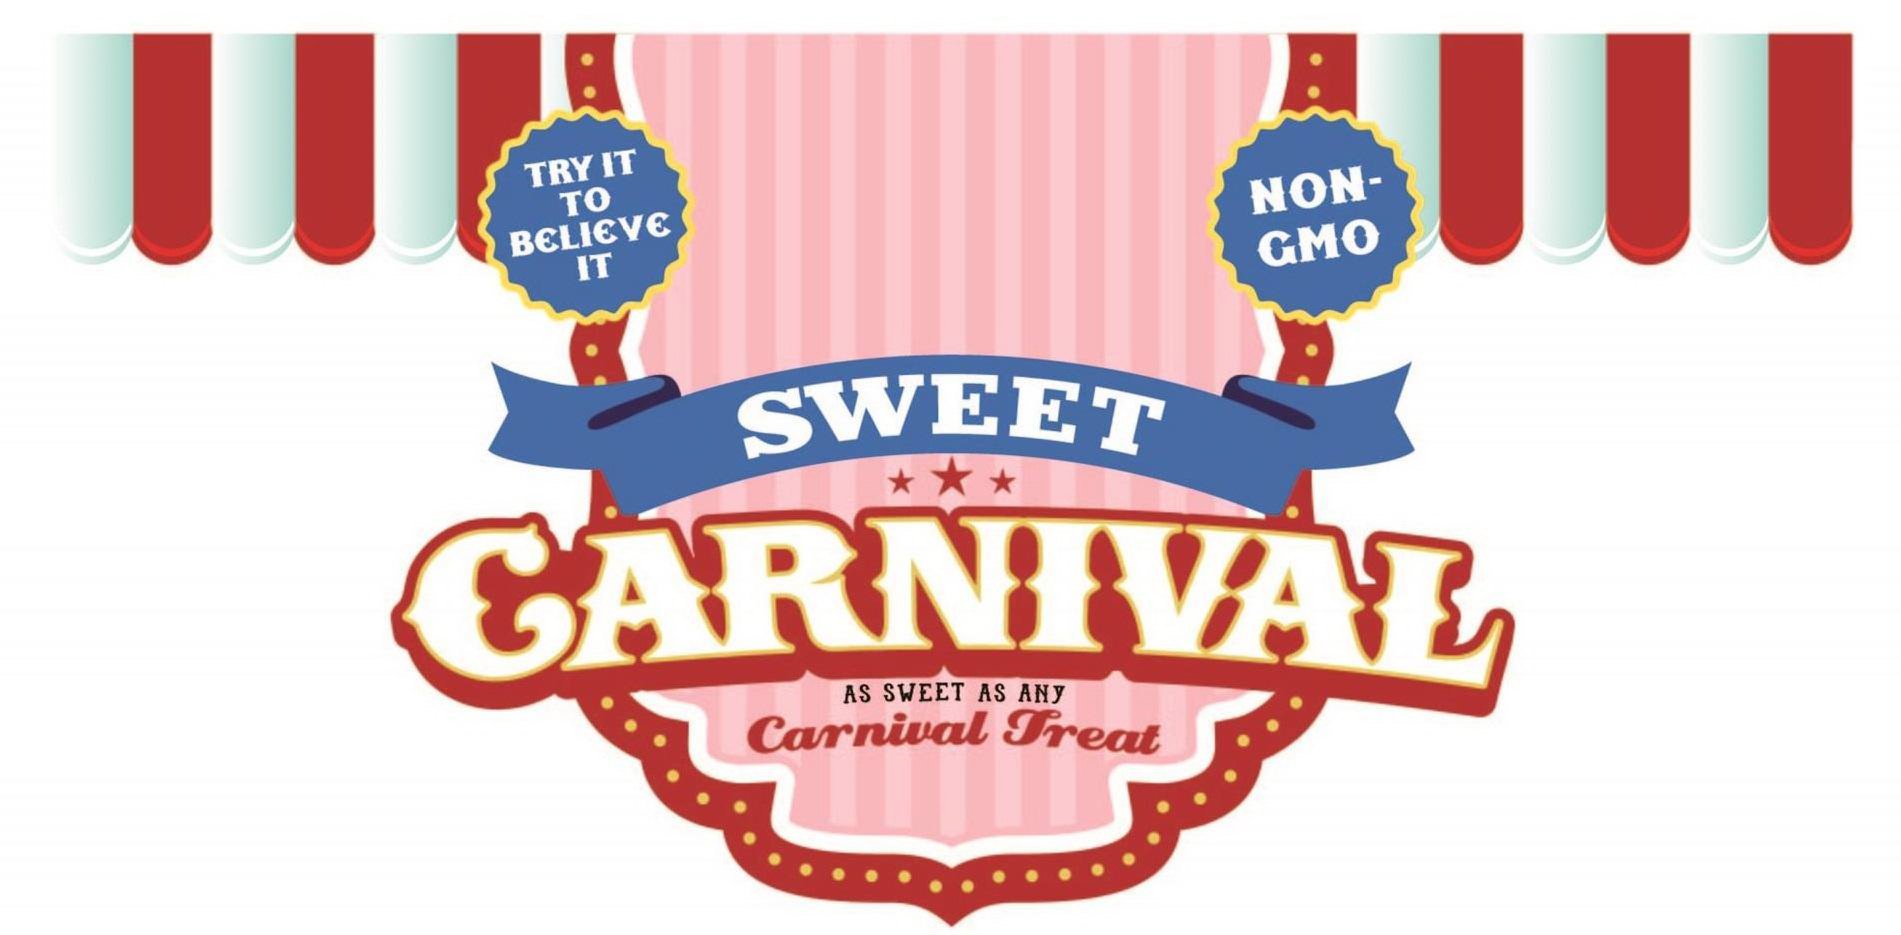  SWEET CARNIVAL AS SWEET AS ANY CARNIVALTREAT TRY IT TO BELIEVE IT NON-GMO &amp; BANNER DESIGN